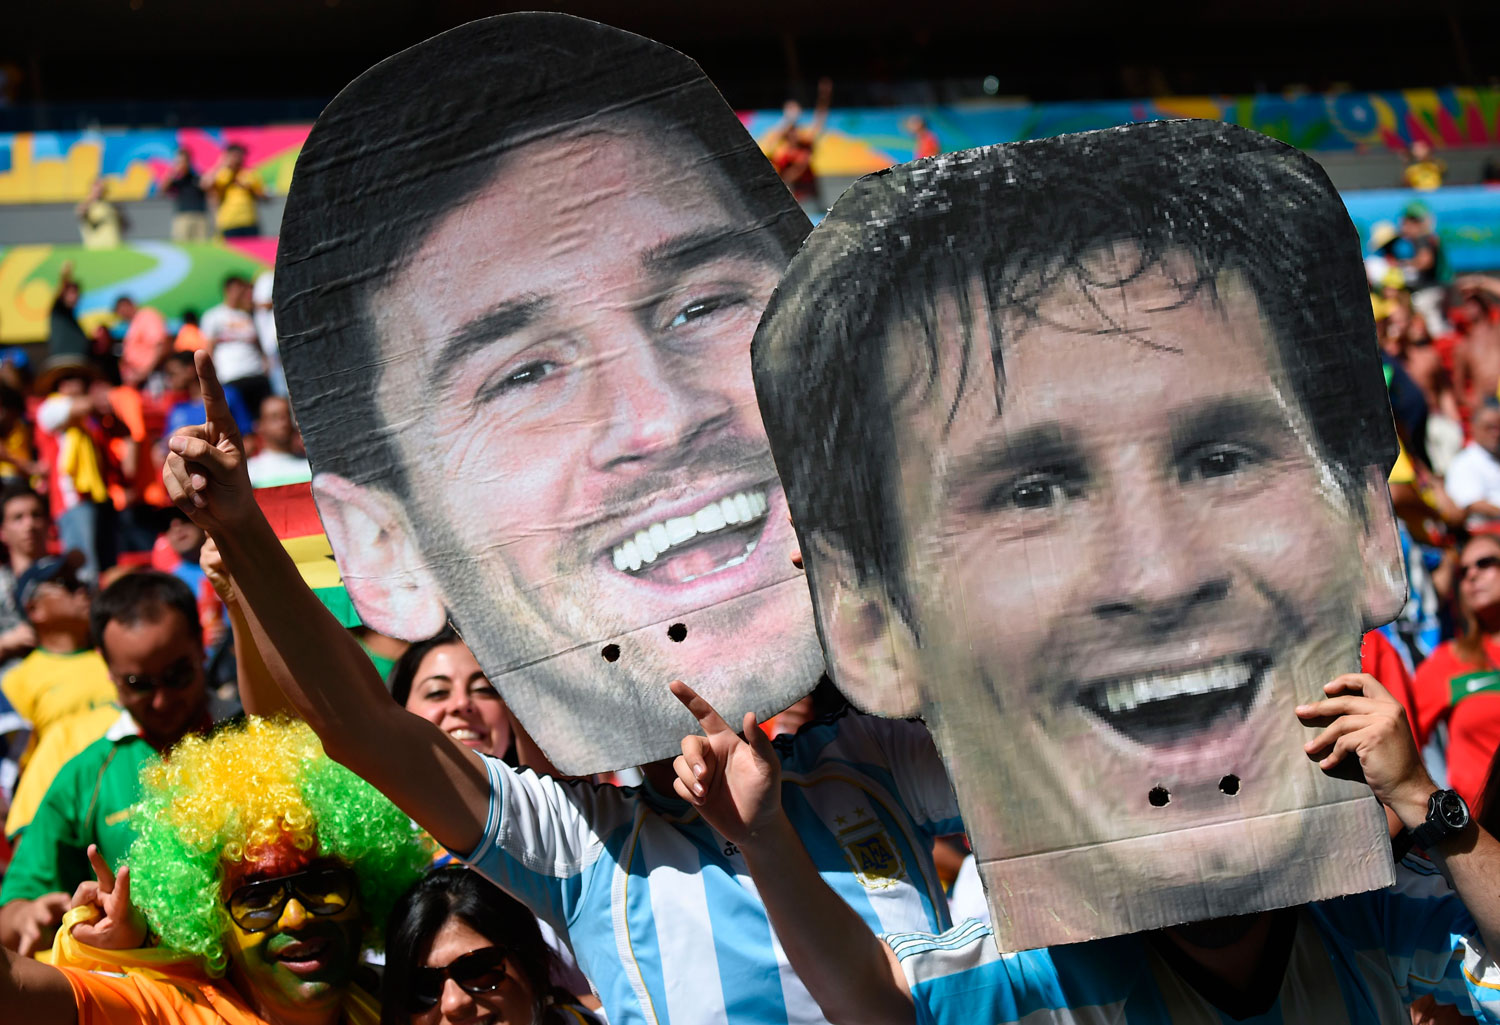 Argentina fans hold up portraits of Argentinian player Lionel Messi during the match between Portugal and Ghana at the Mane Garrincha National Stadium in Brasilia, Brazil on June 26, 2014.